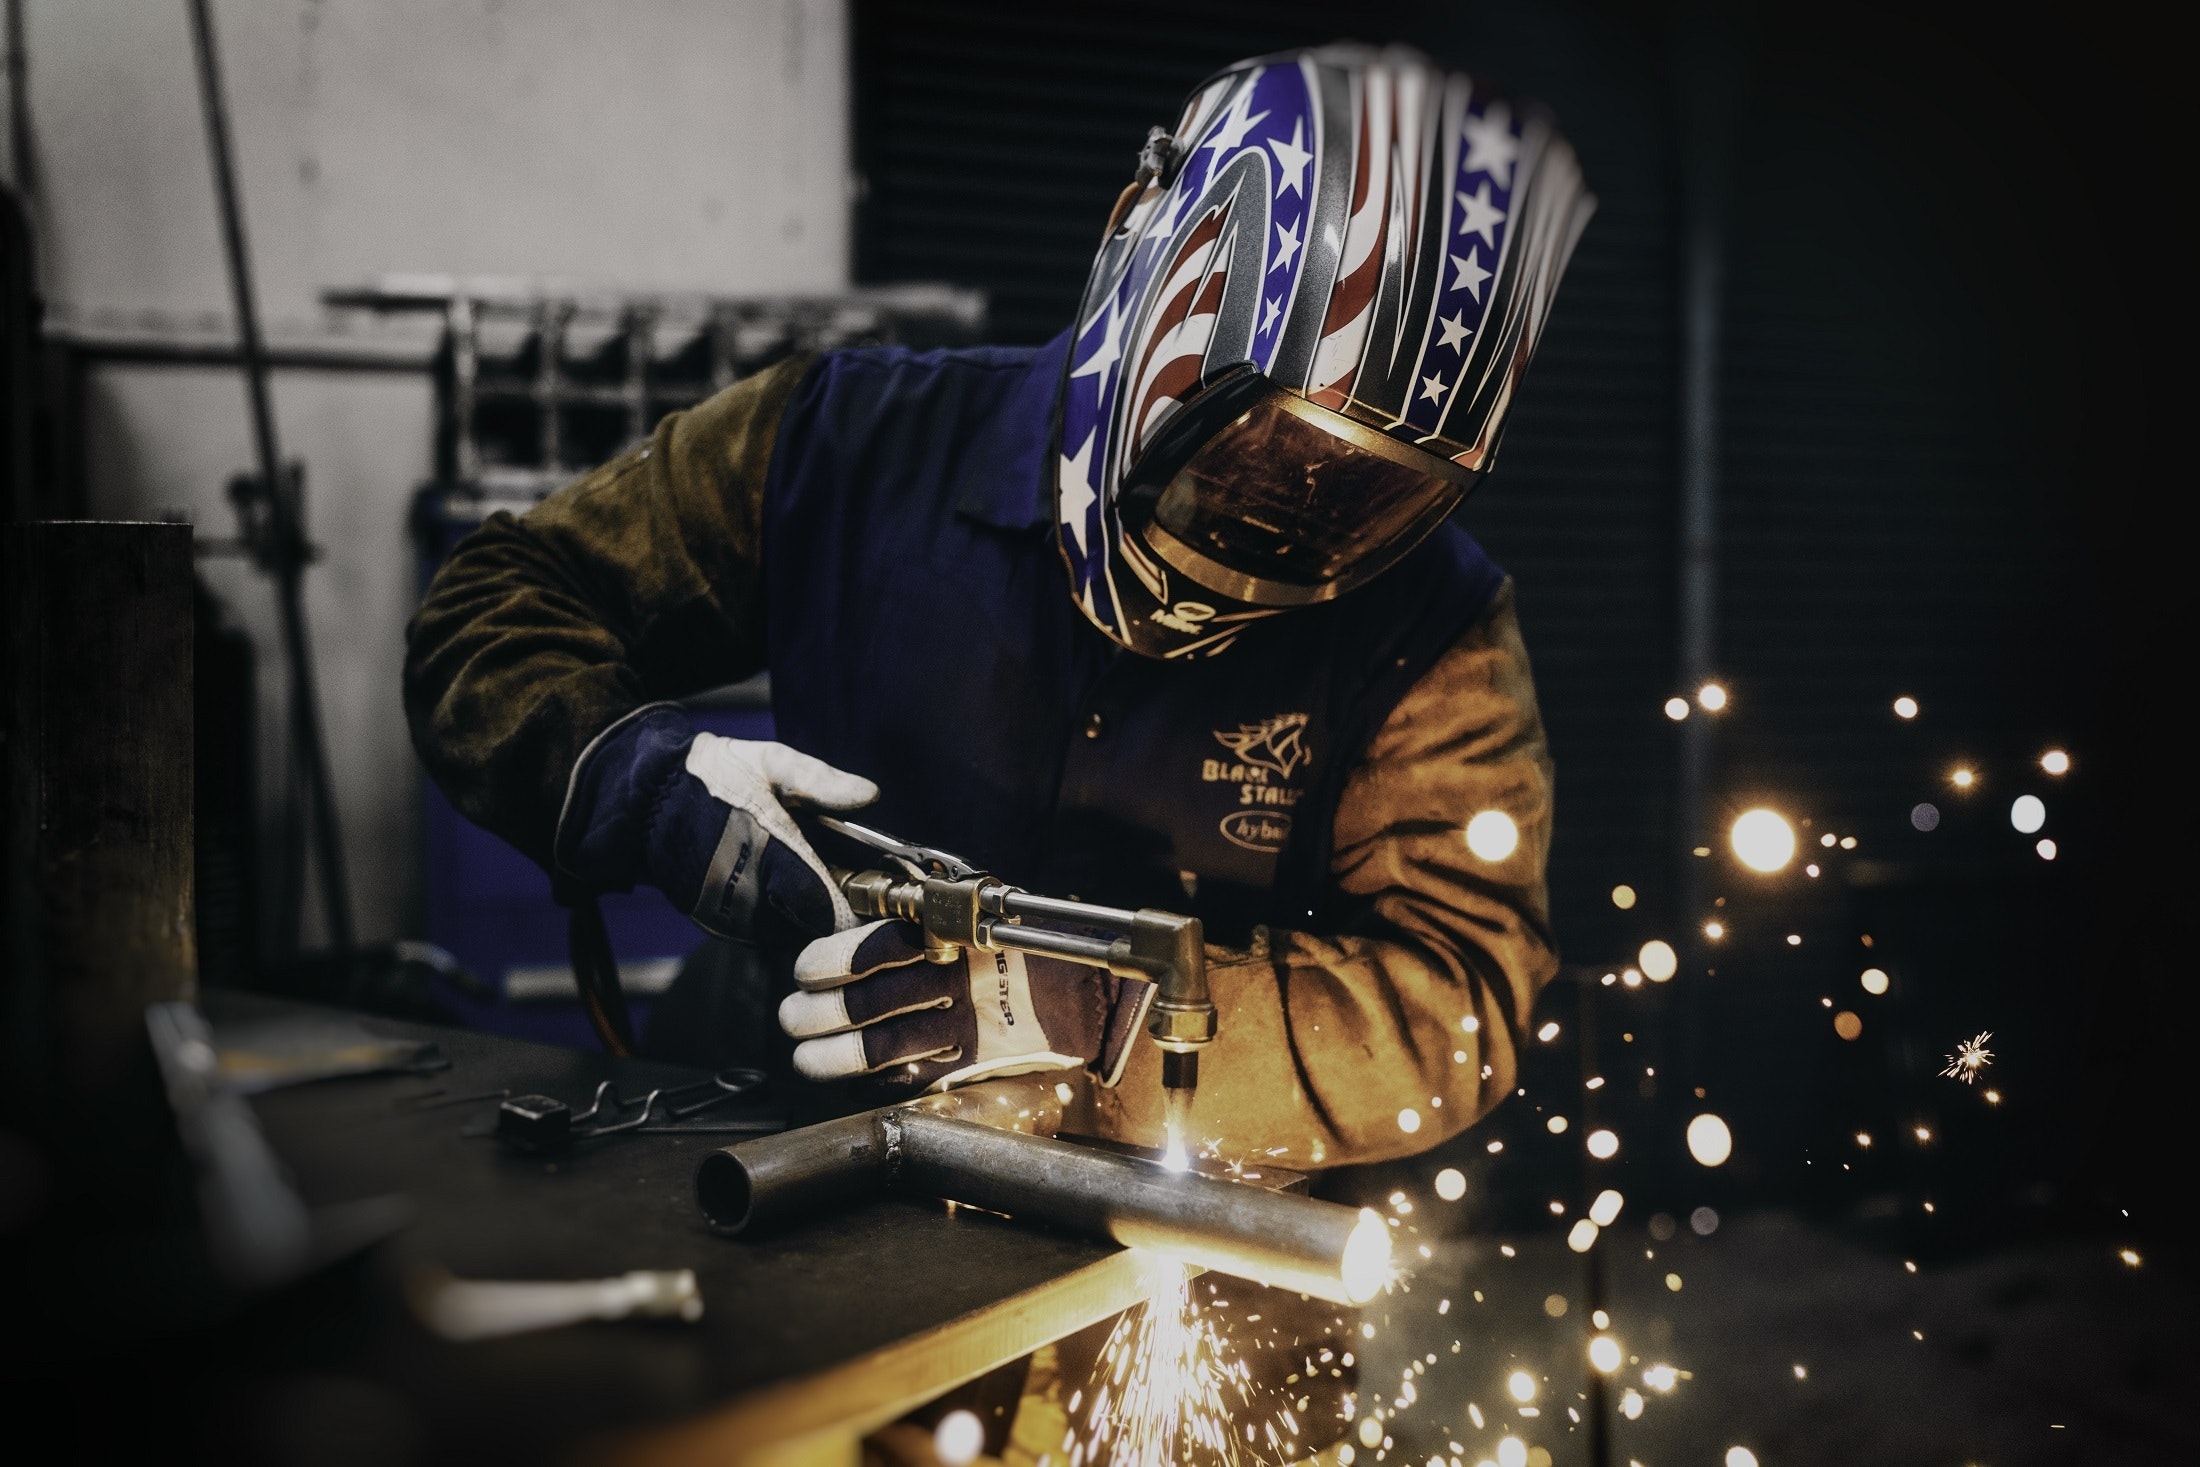 Common Welding Issues and How to Correct Them